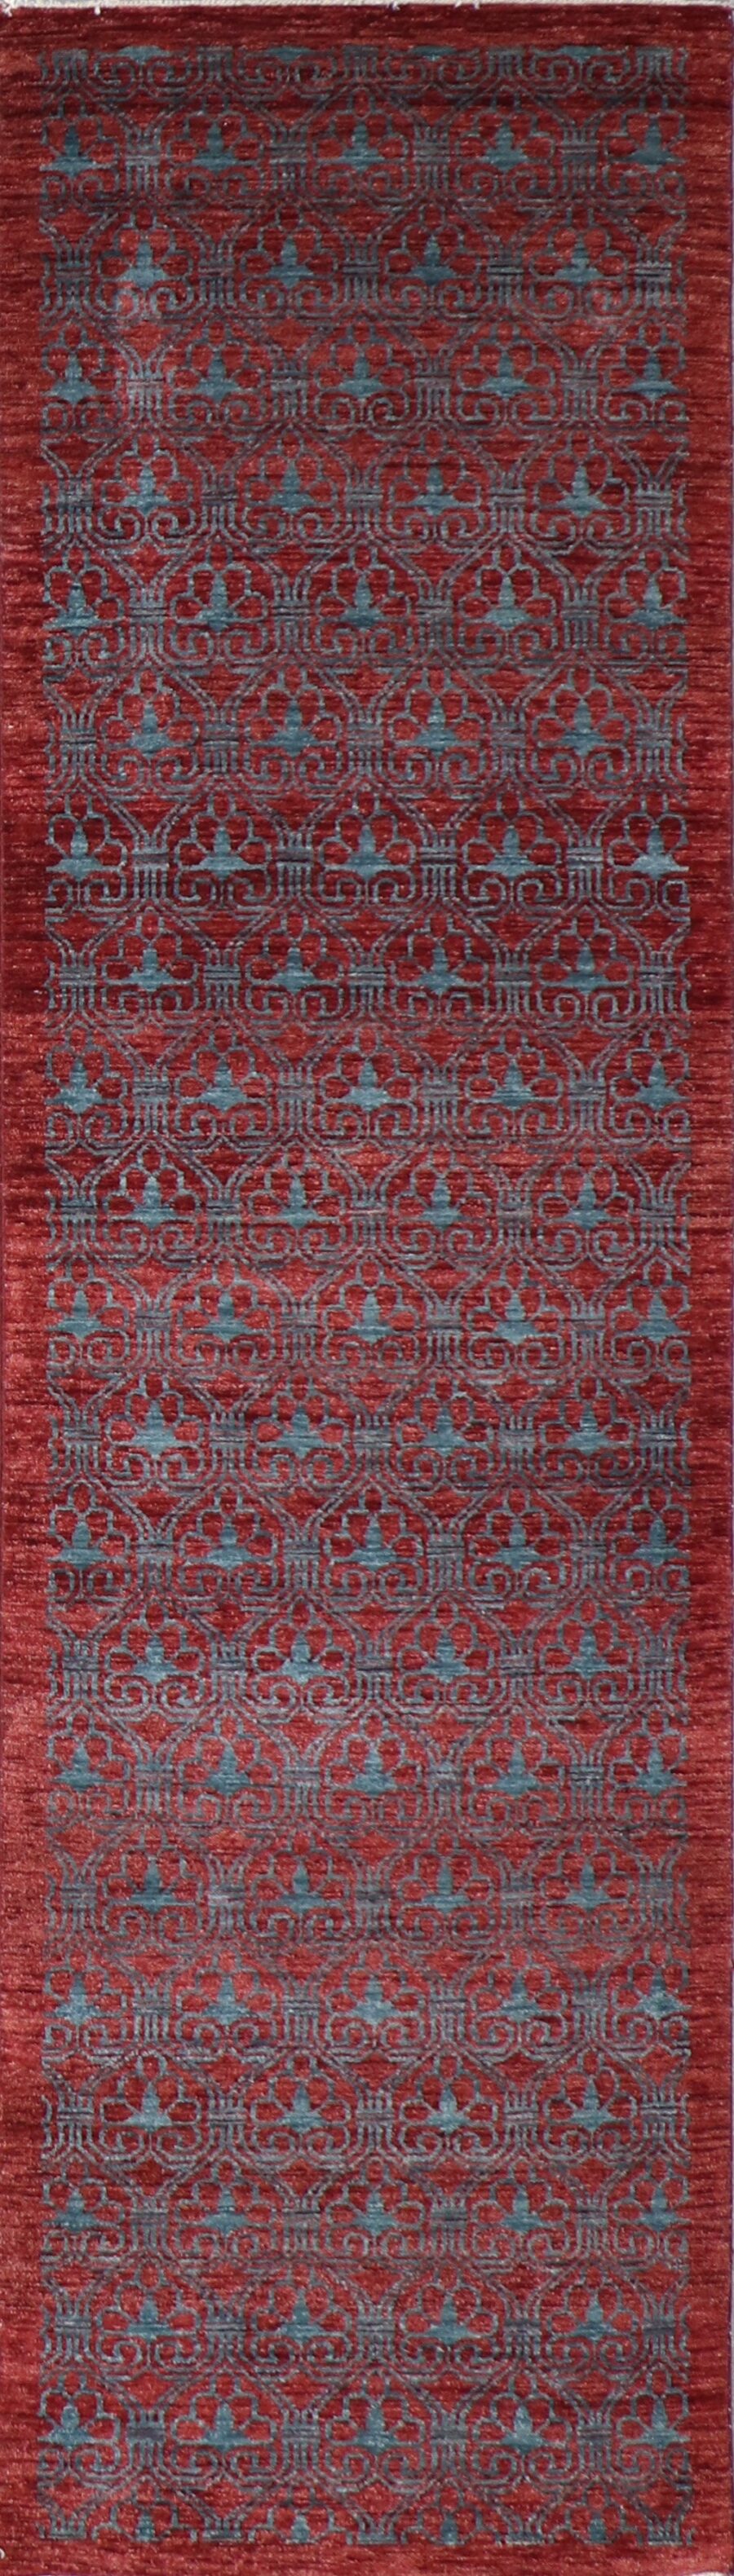 2’8”x10’2” Transitional Red Wool Hand-Knotted Rug - Direct Rug Import | Rugs in Chicago, Indiana,South Bend,Granger